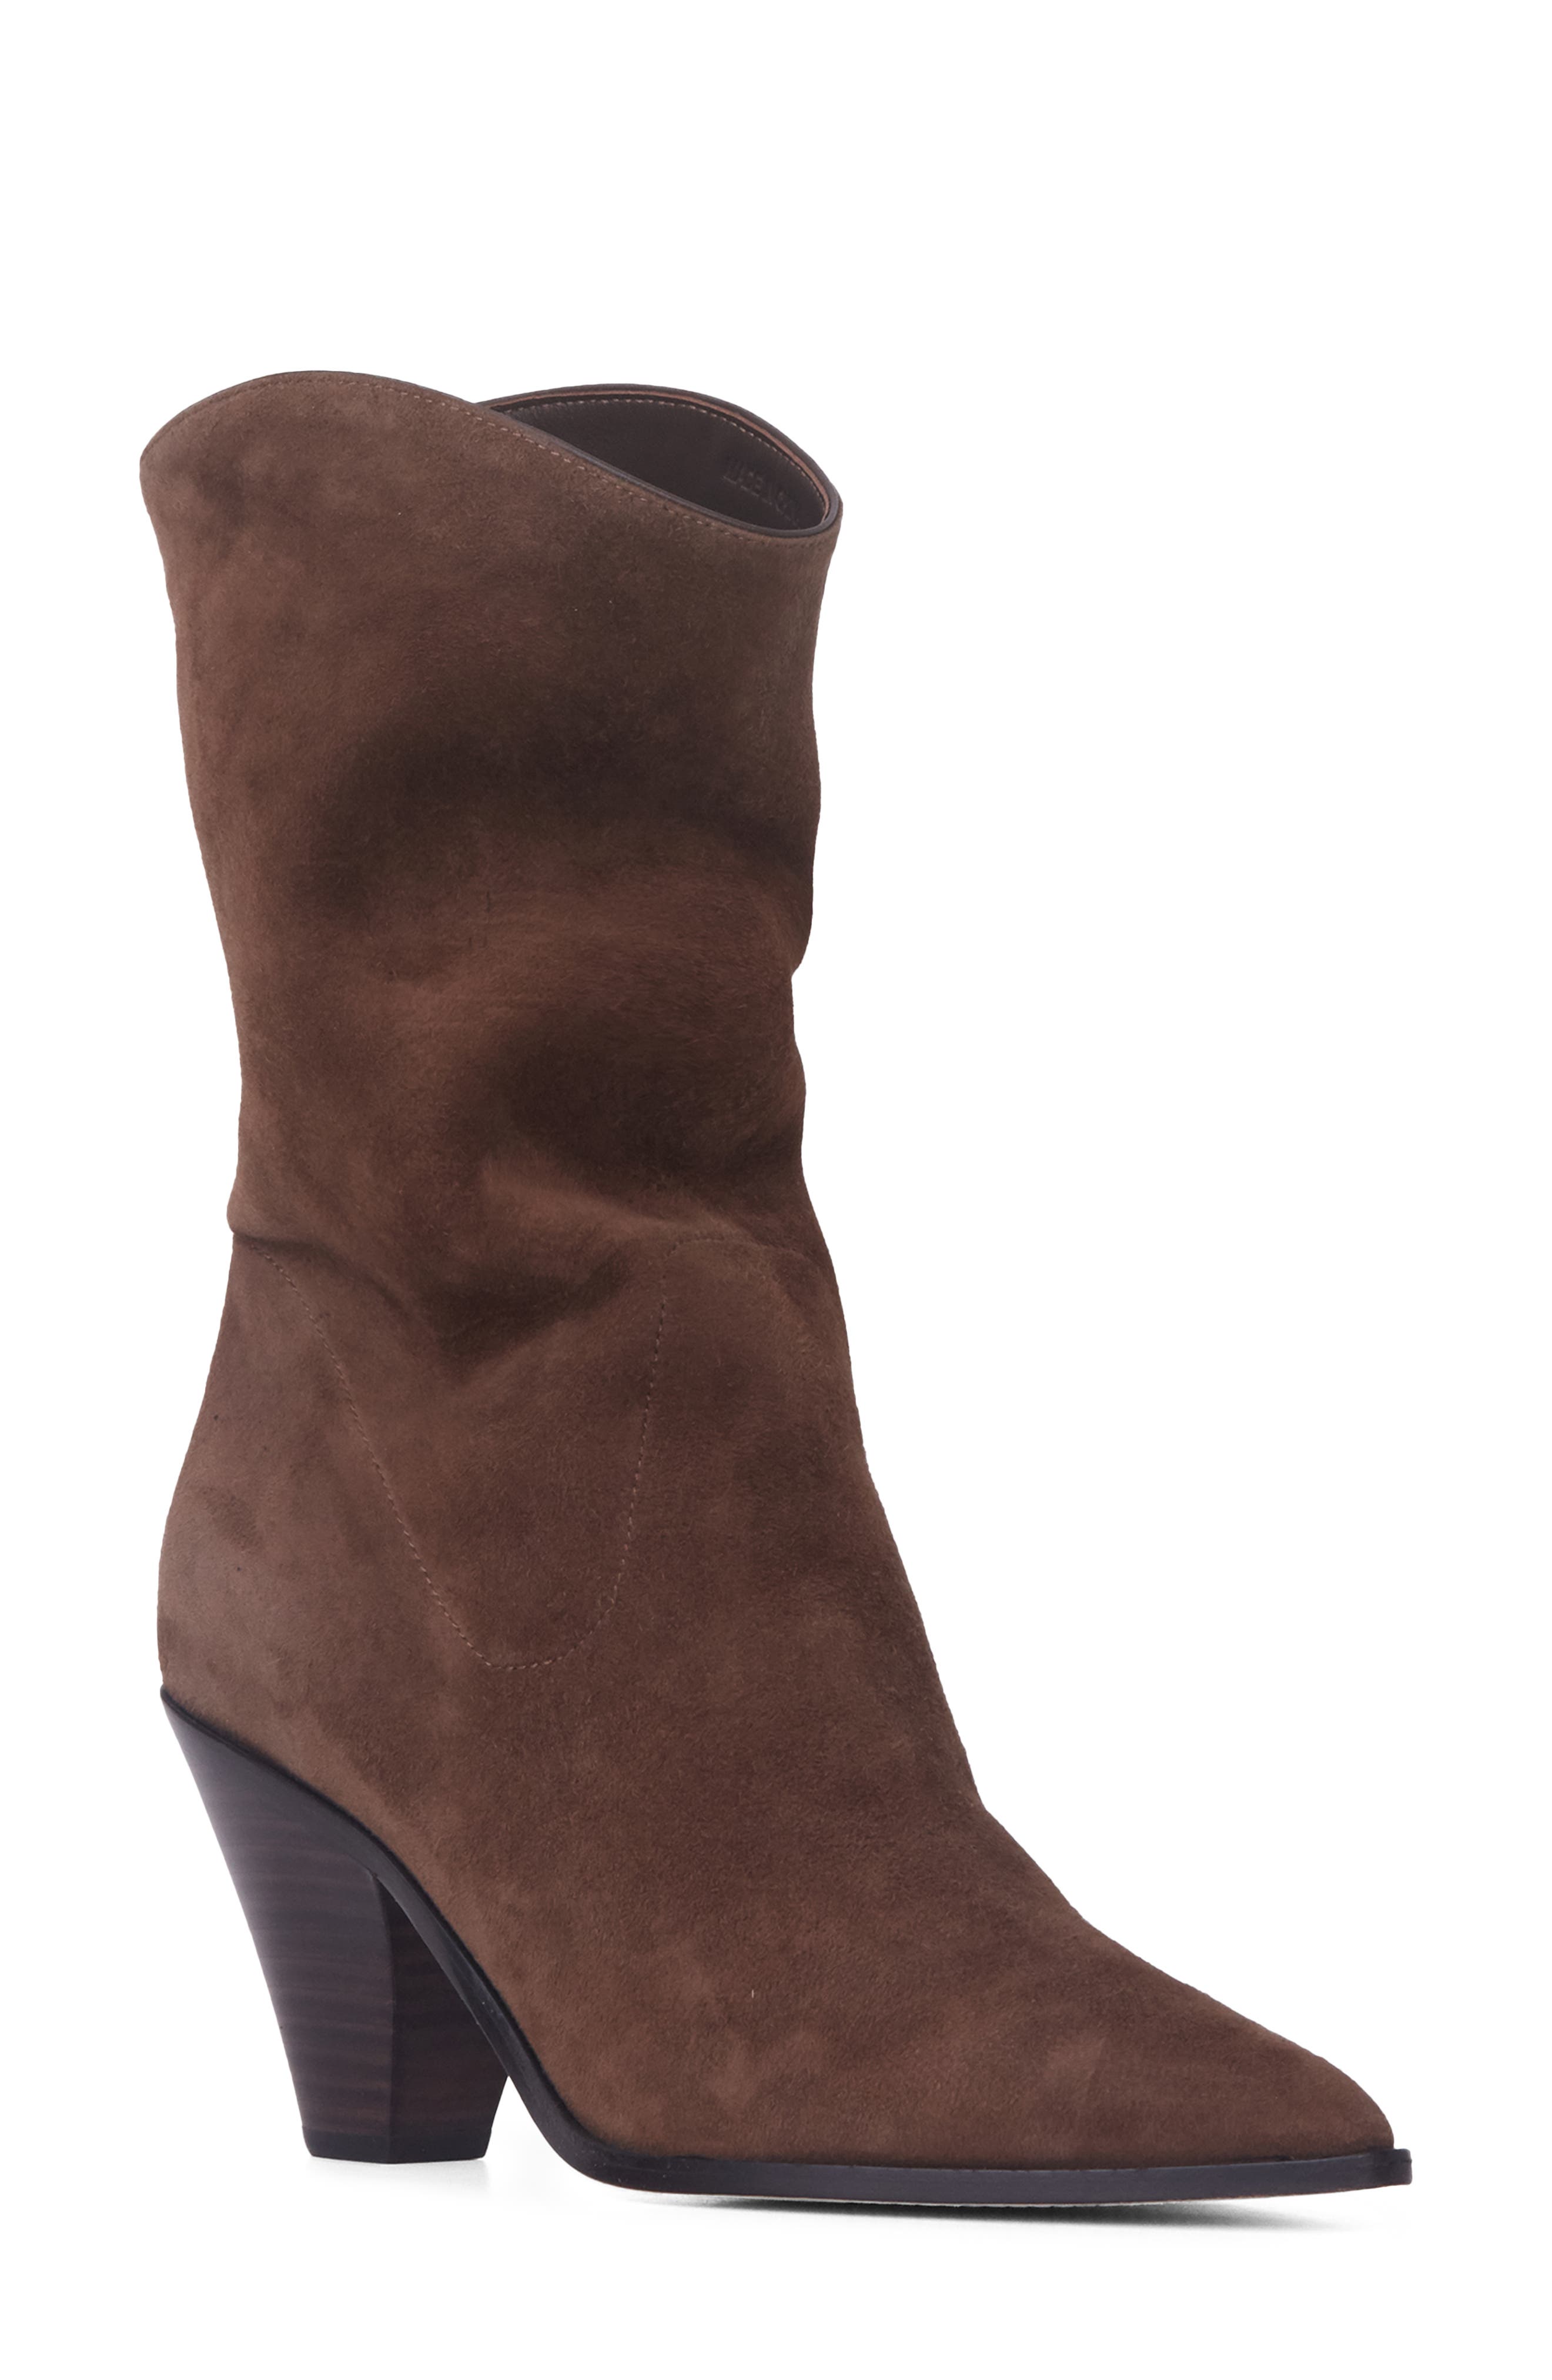 Paige Landyn Pointed Toe Bootie In Cocoa